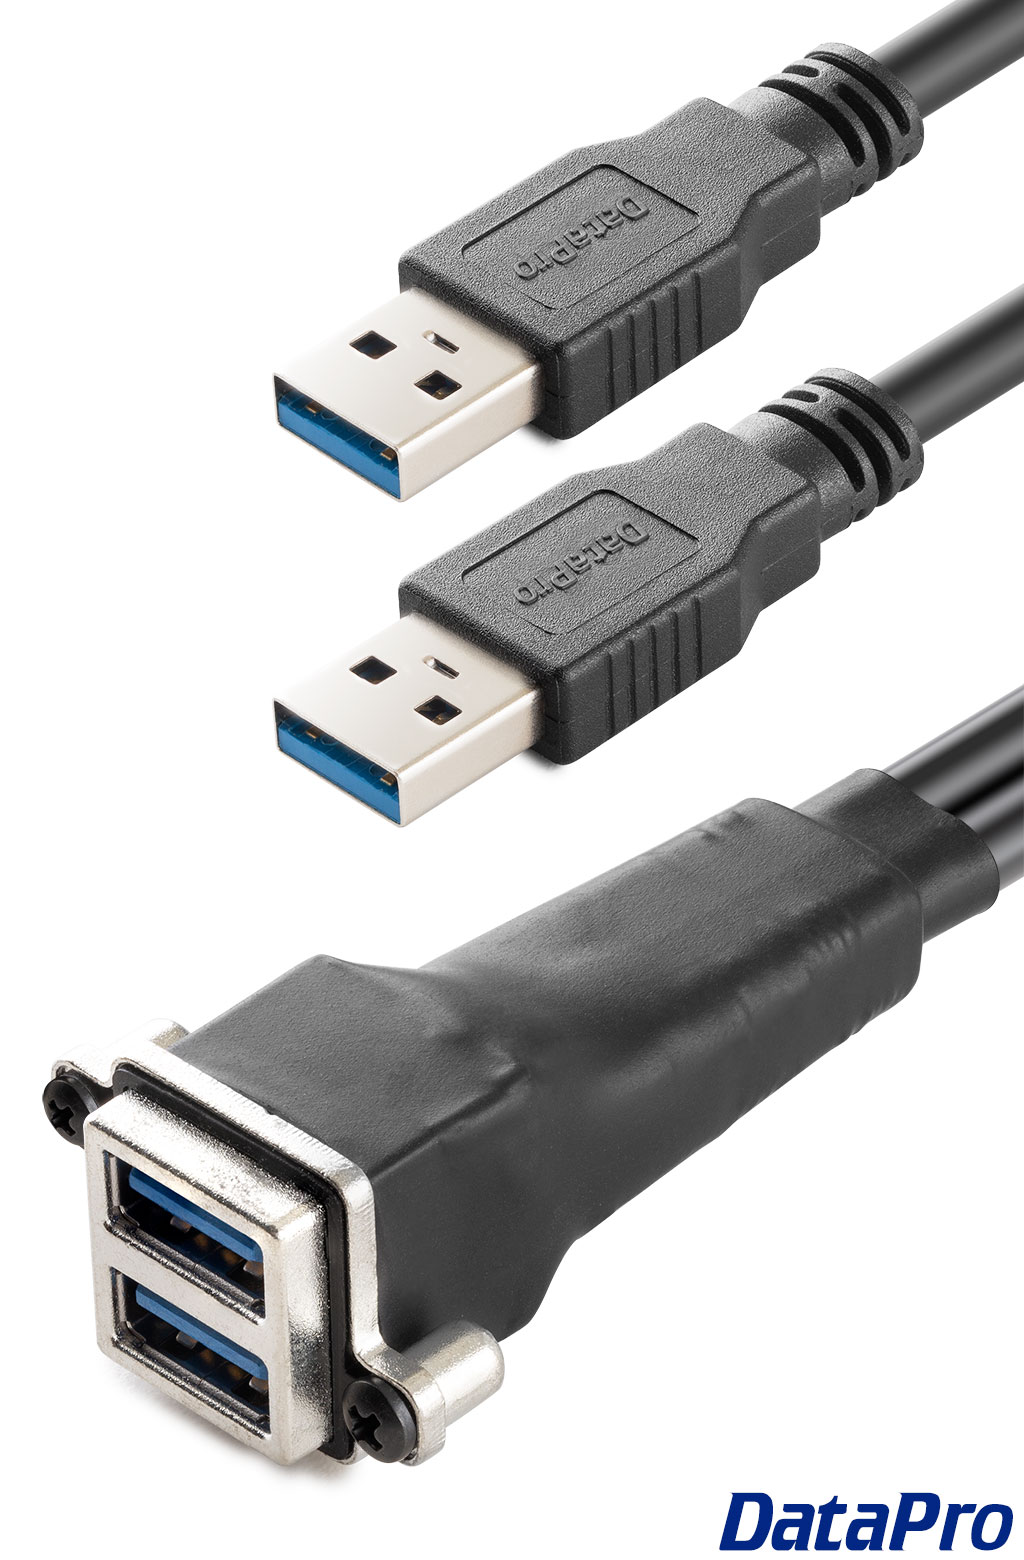 DataPro's HDMI Guide and FAQ